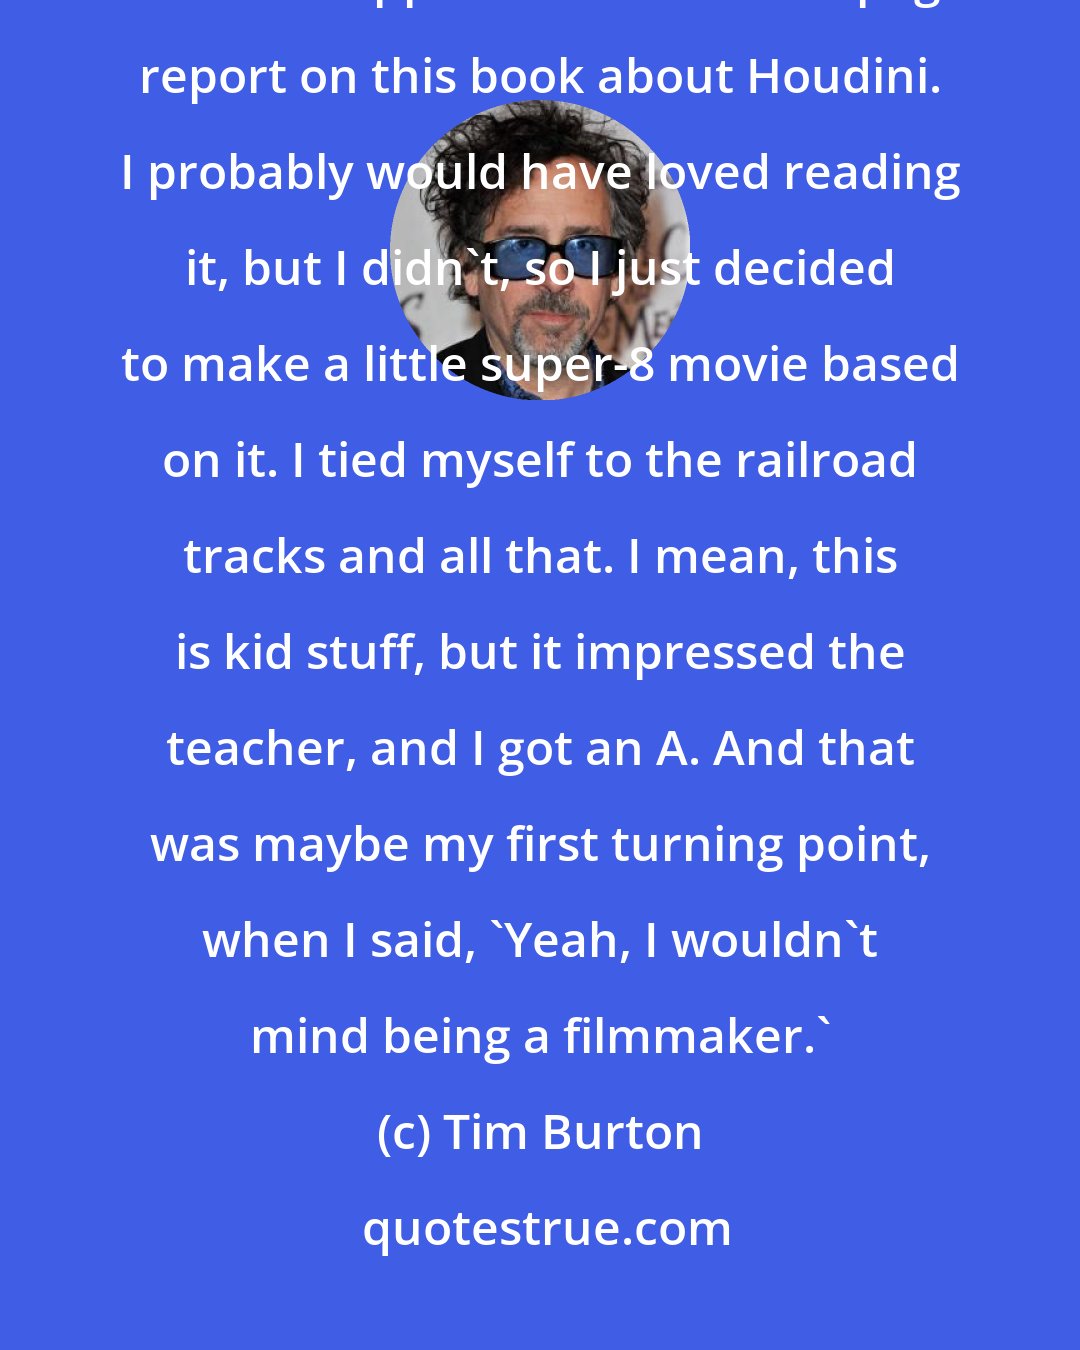 Tim Burton: There was one moment, and it happened in school. I had a big final exam - we were supposed to write a 20-page report on this book about Houdini. I probably would have loved reading it, but I didn't, so I just decided to make a little super-8 movie based on it. I tied myself to the railroad tracks and all that. I mean, this is kid stuff, but it impressed the teacher, and I got an A. And that was maybe my first turning point, when I said, 'Yeah, I wouldn't mind being a filmmaker.'